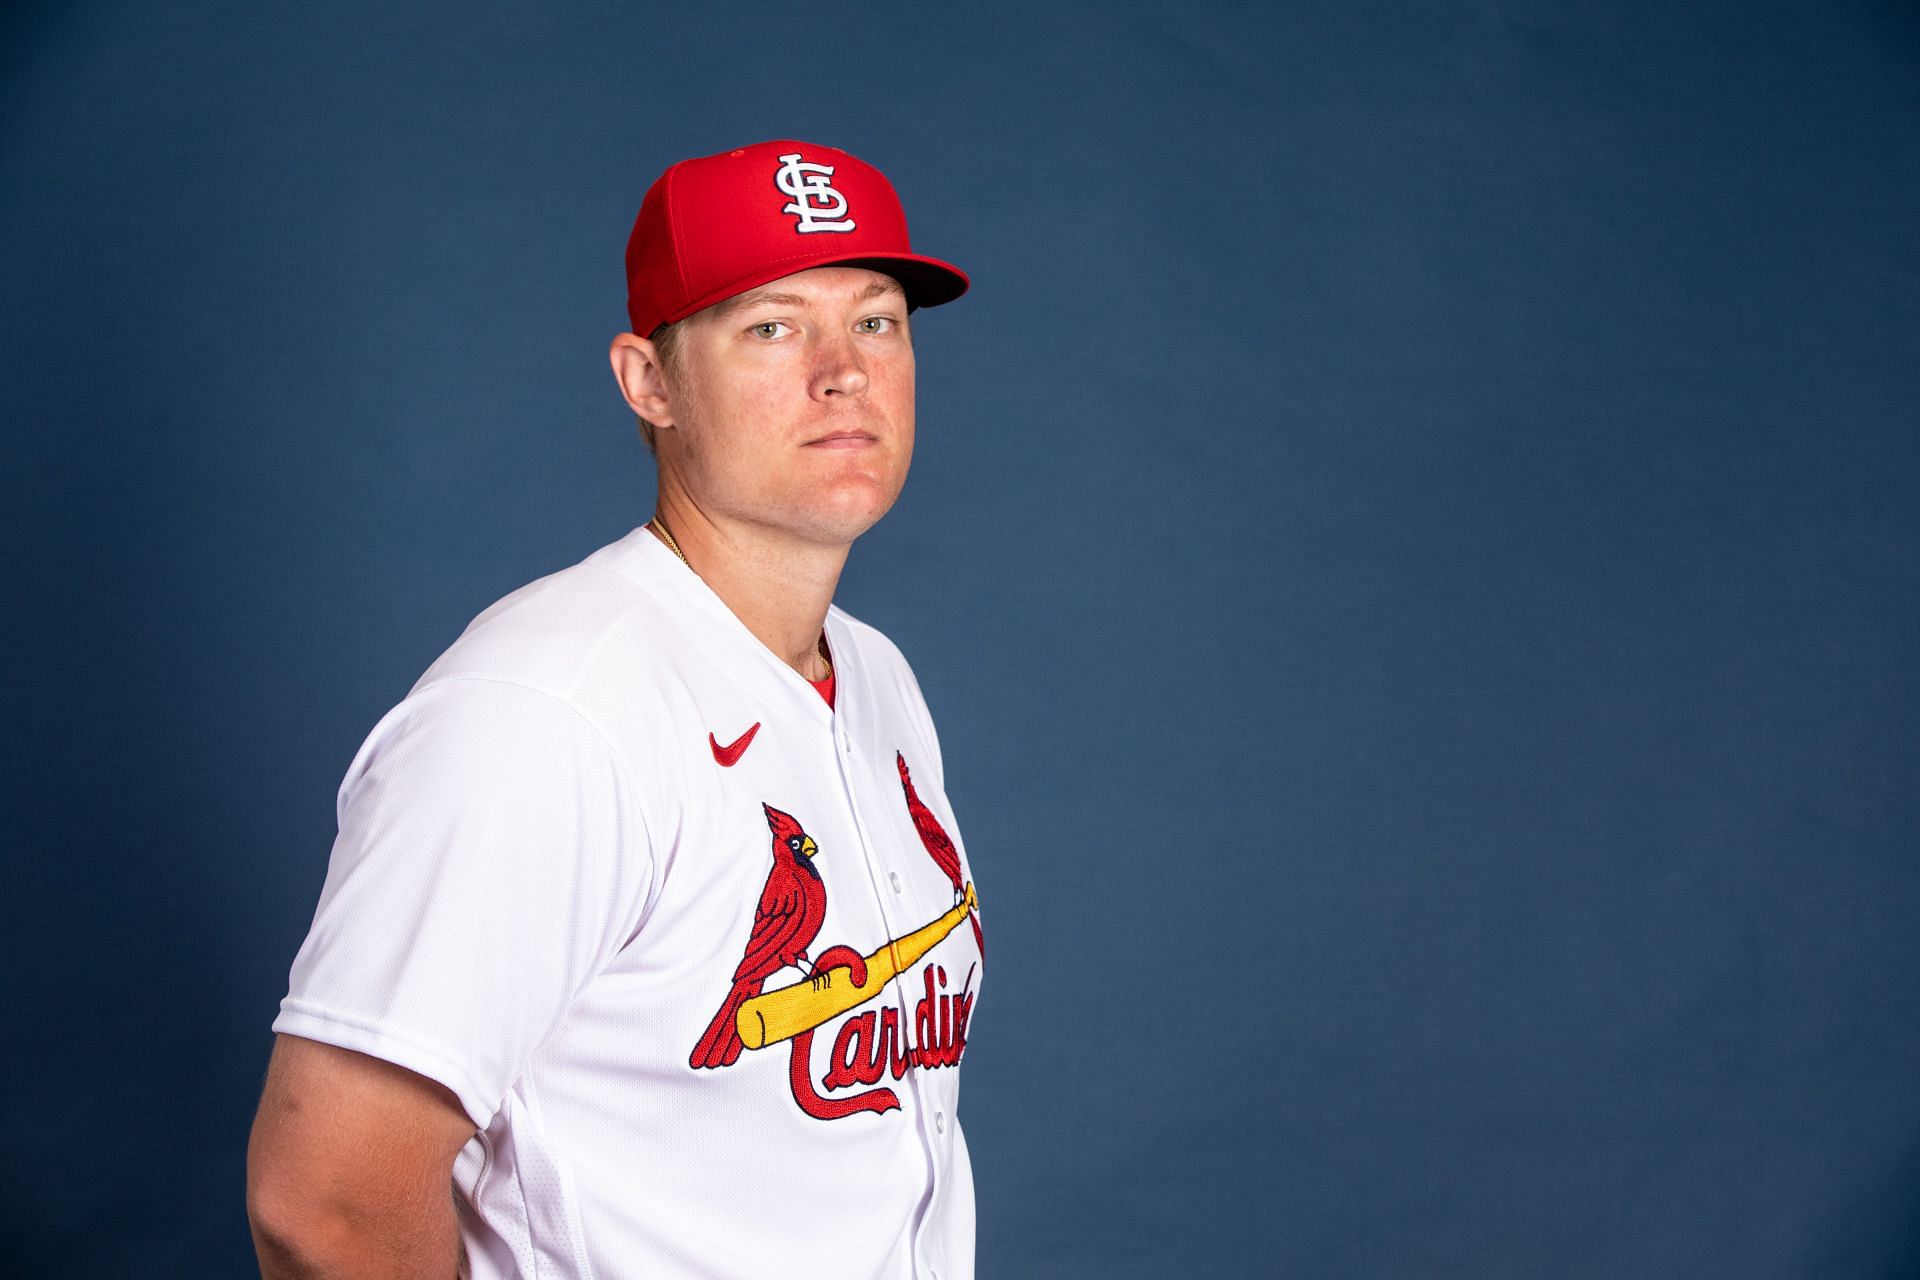 Frogs in the Pros: Luken Baker makes MLB debut with St. Louis Cardinals -  Frogs O' War